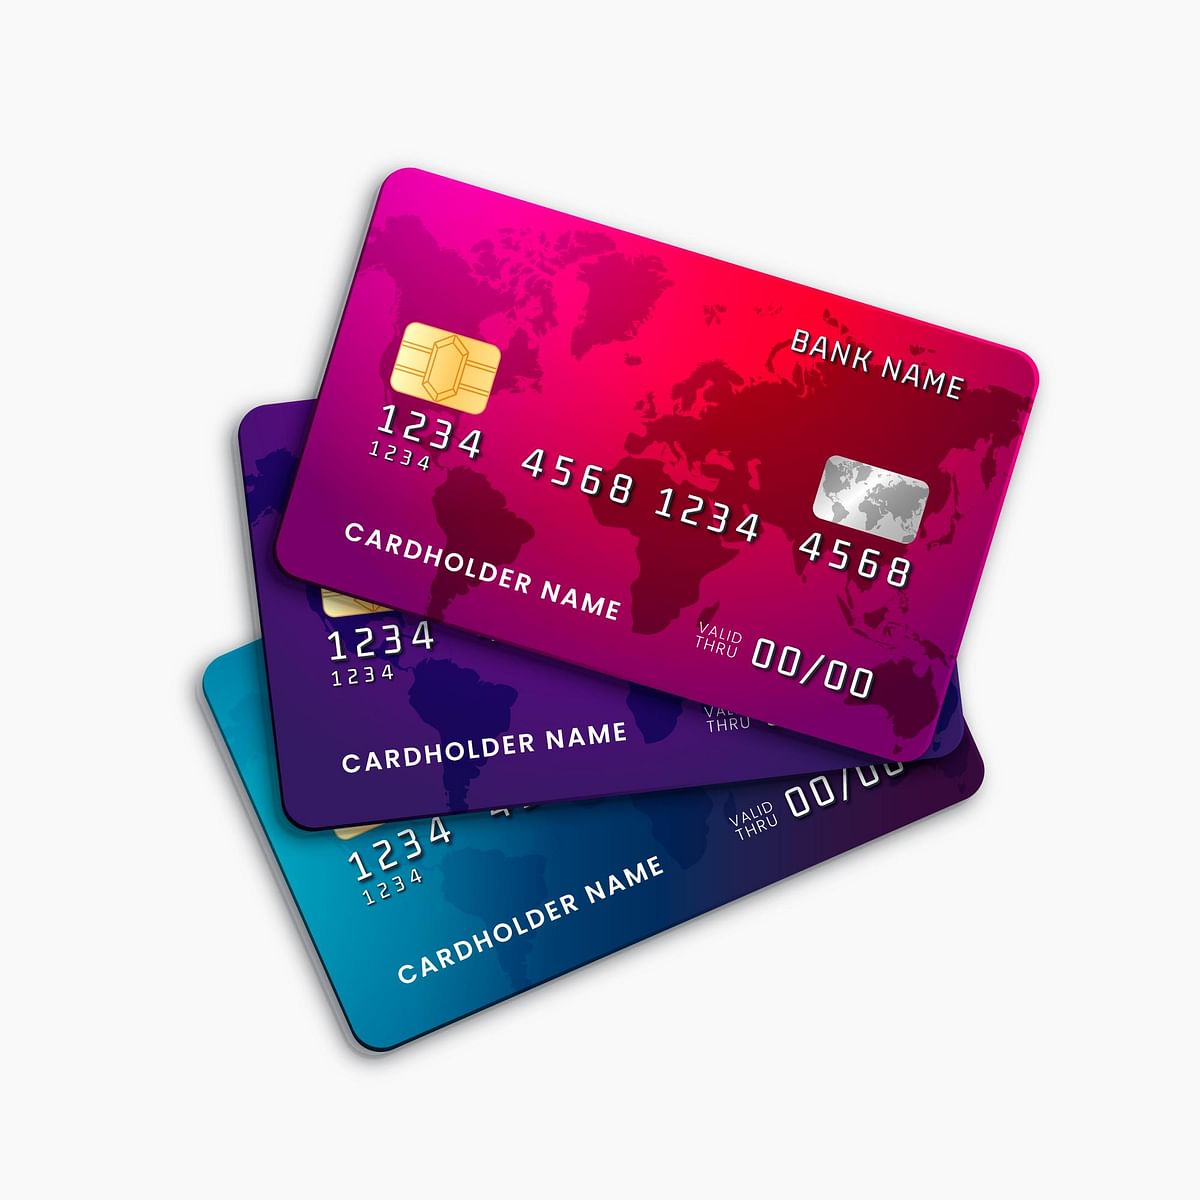 Axis Bank Magnus Credit Card Vs HDFC Jetprivilege Diners Club Credit Card: Which One Has Better Lifestyle Benefits?